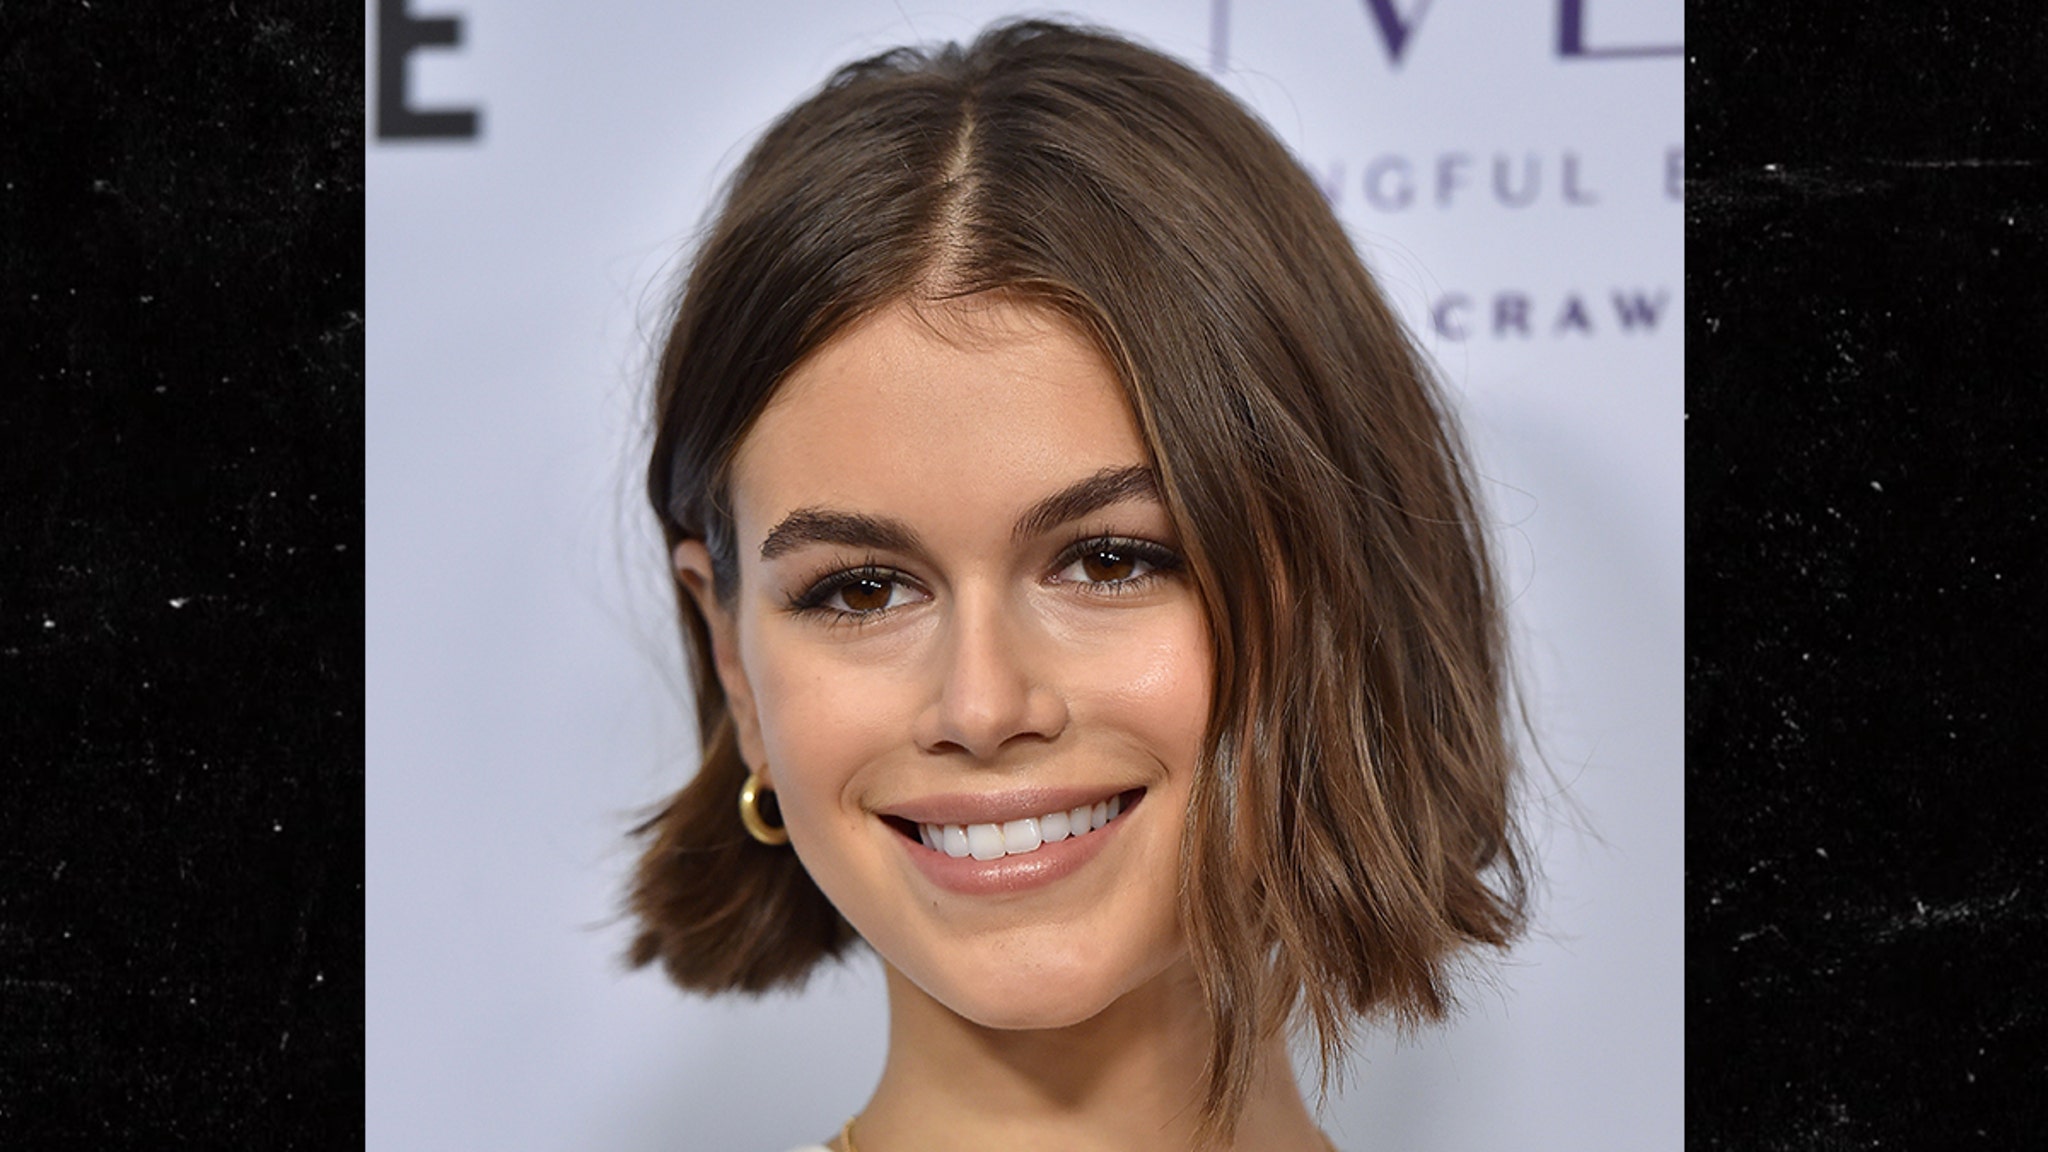 Model Kaia Gerber's Now Wearing 'P' Necklace After Pete Davidson Date